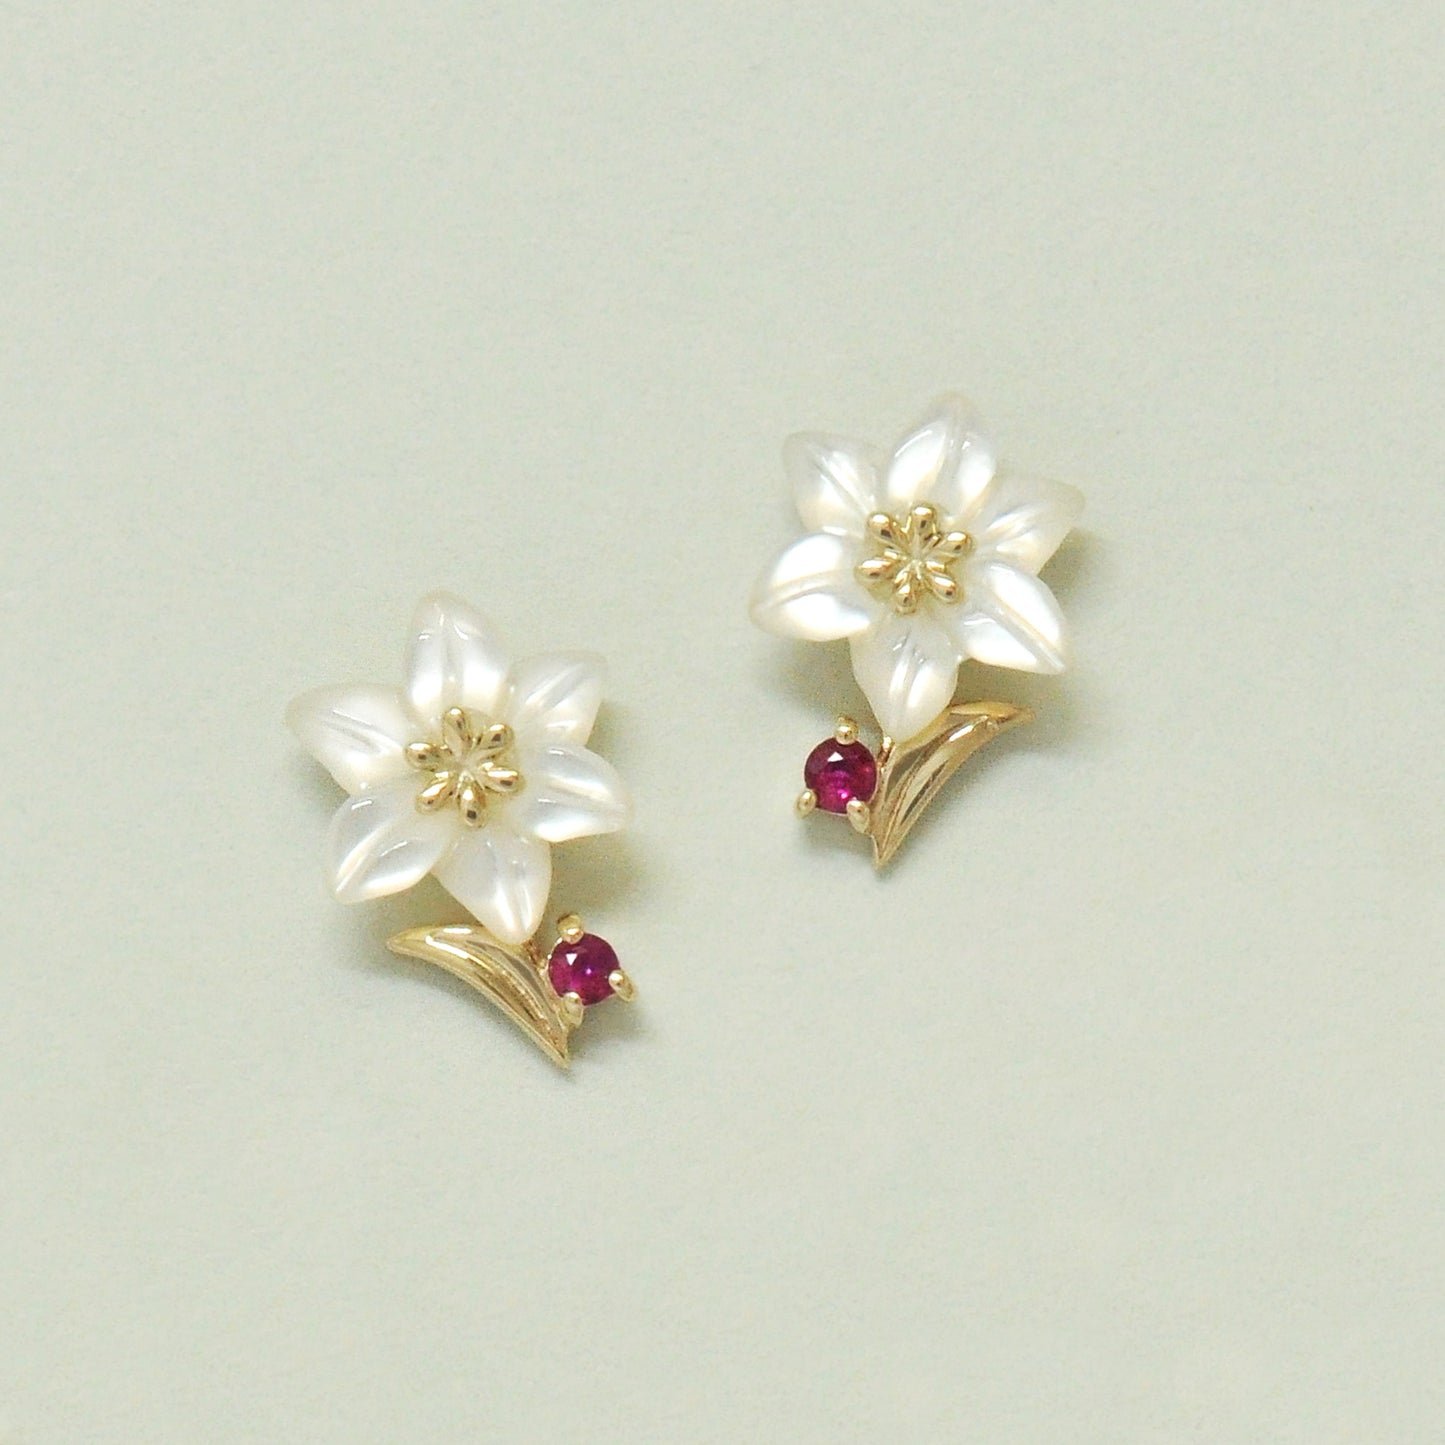 [Birth Flower Jewelry] July Lily Earrings (Yellow Gold) - Product Image